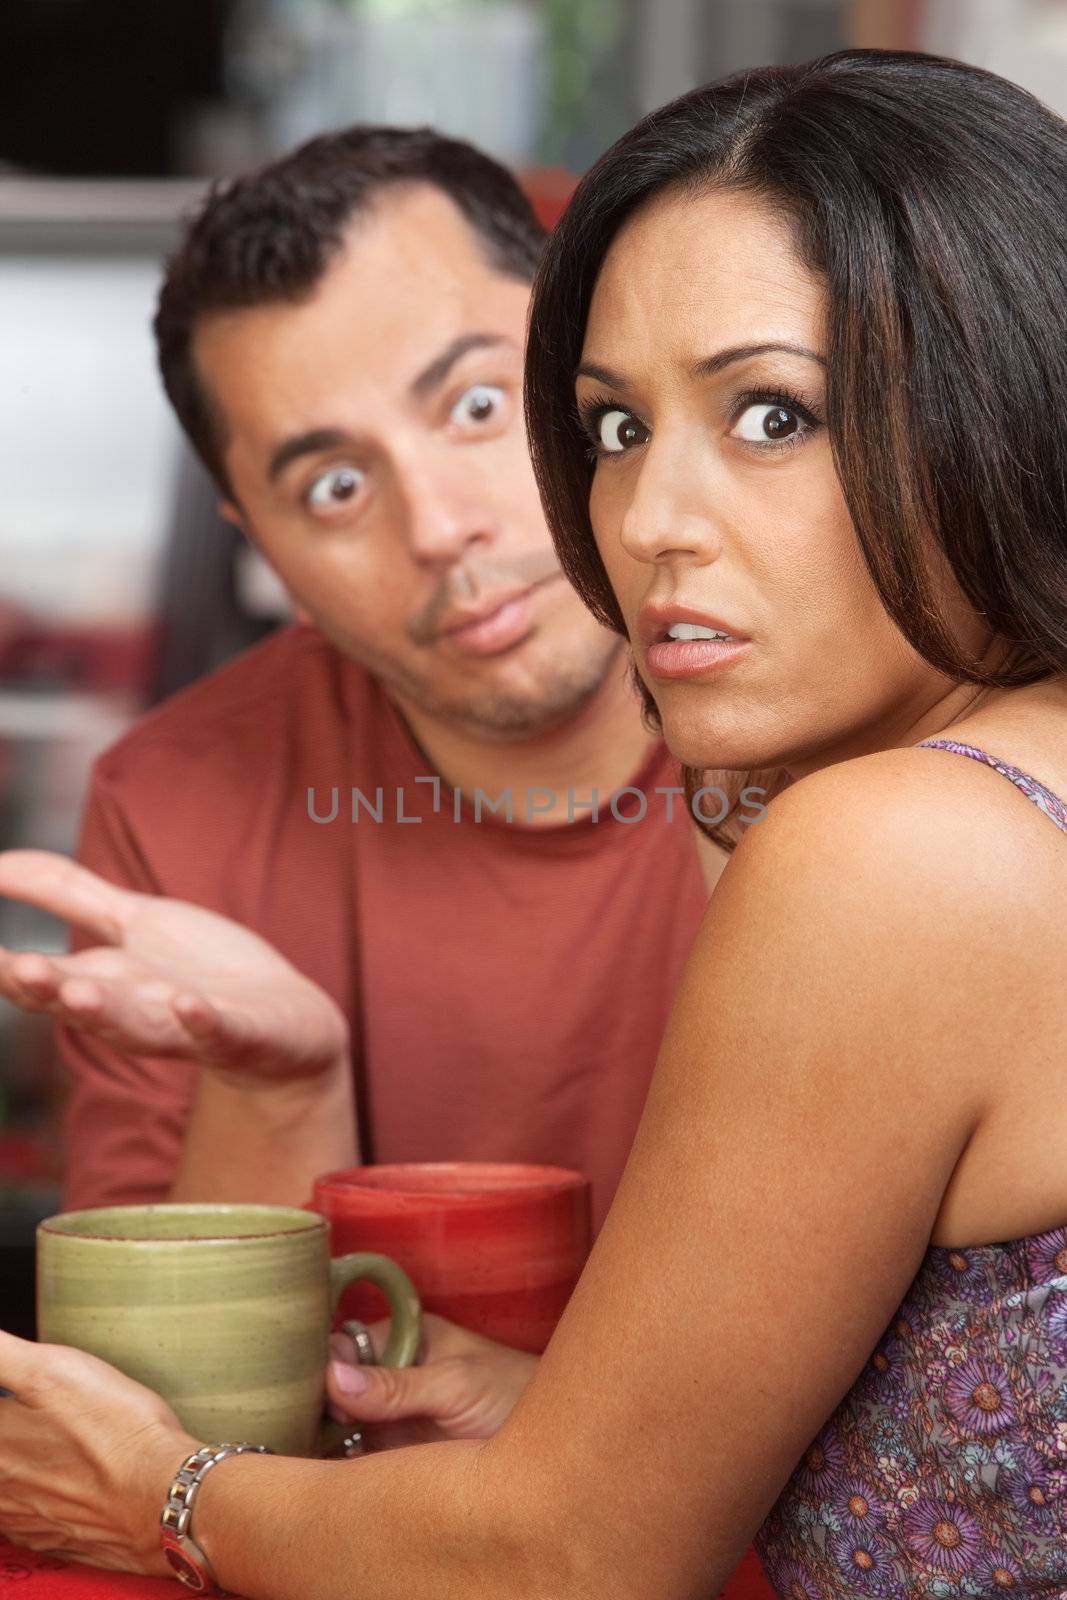 Embarrassed woman arguing a in a restaurant with man